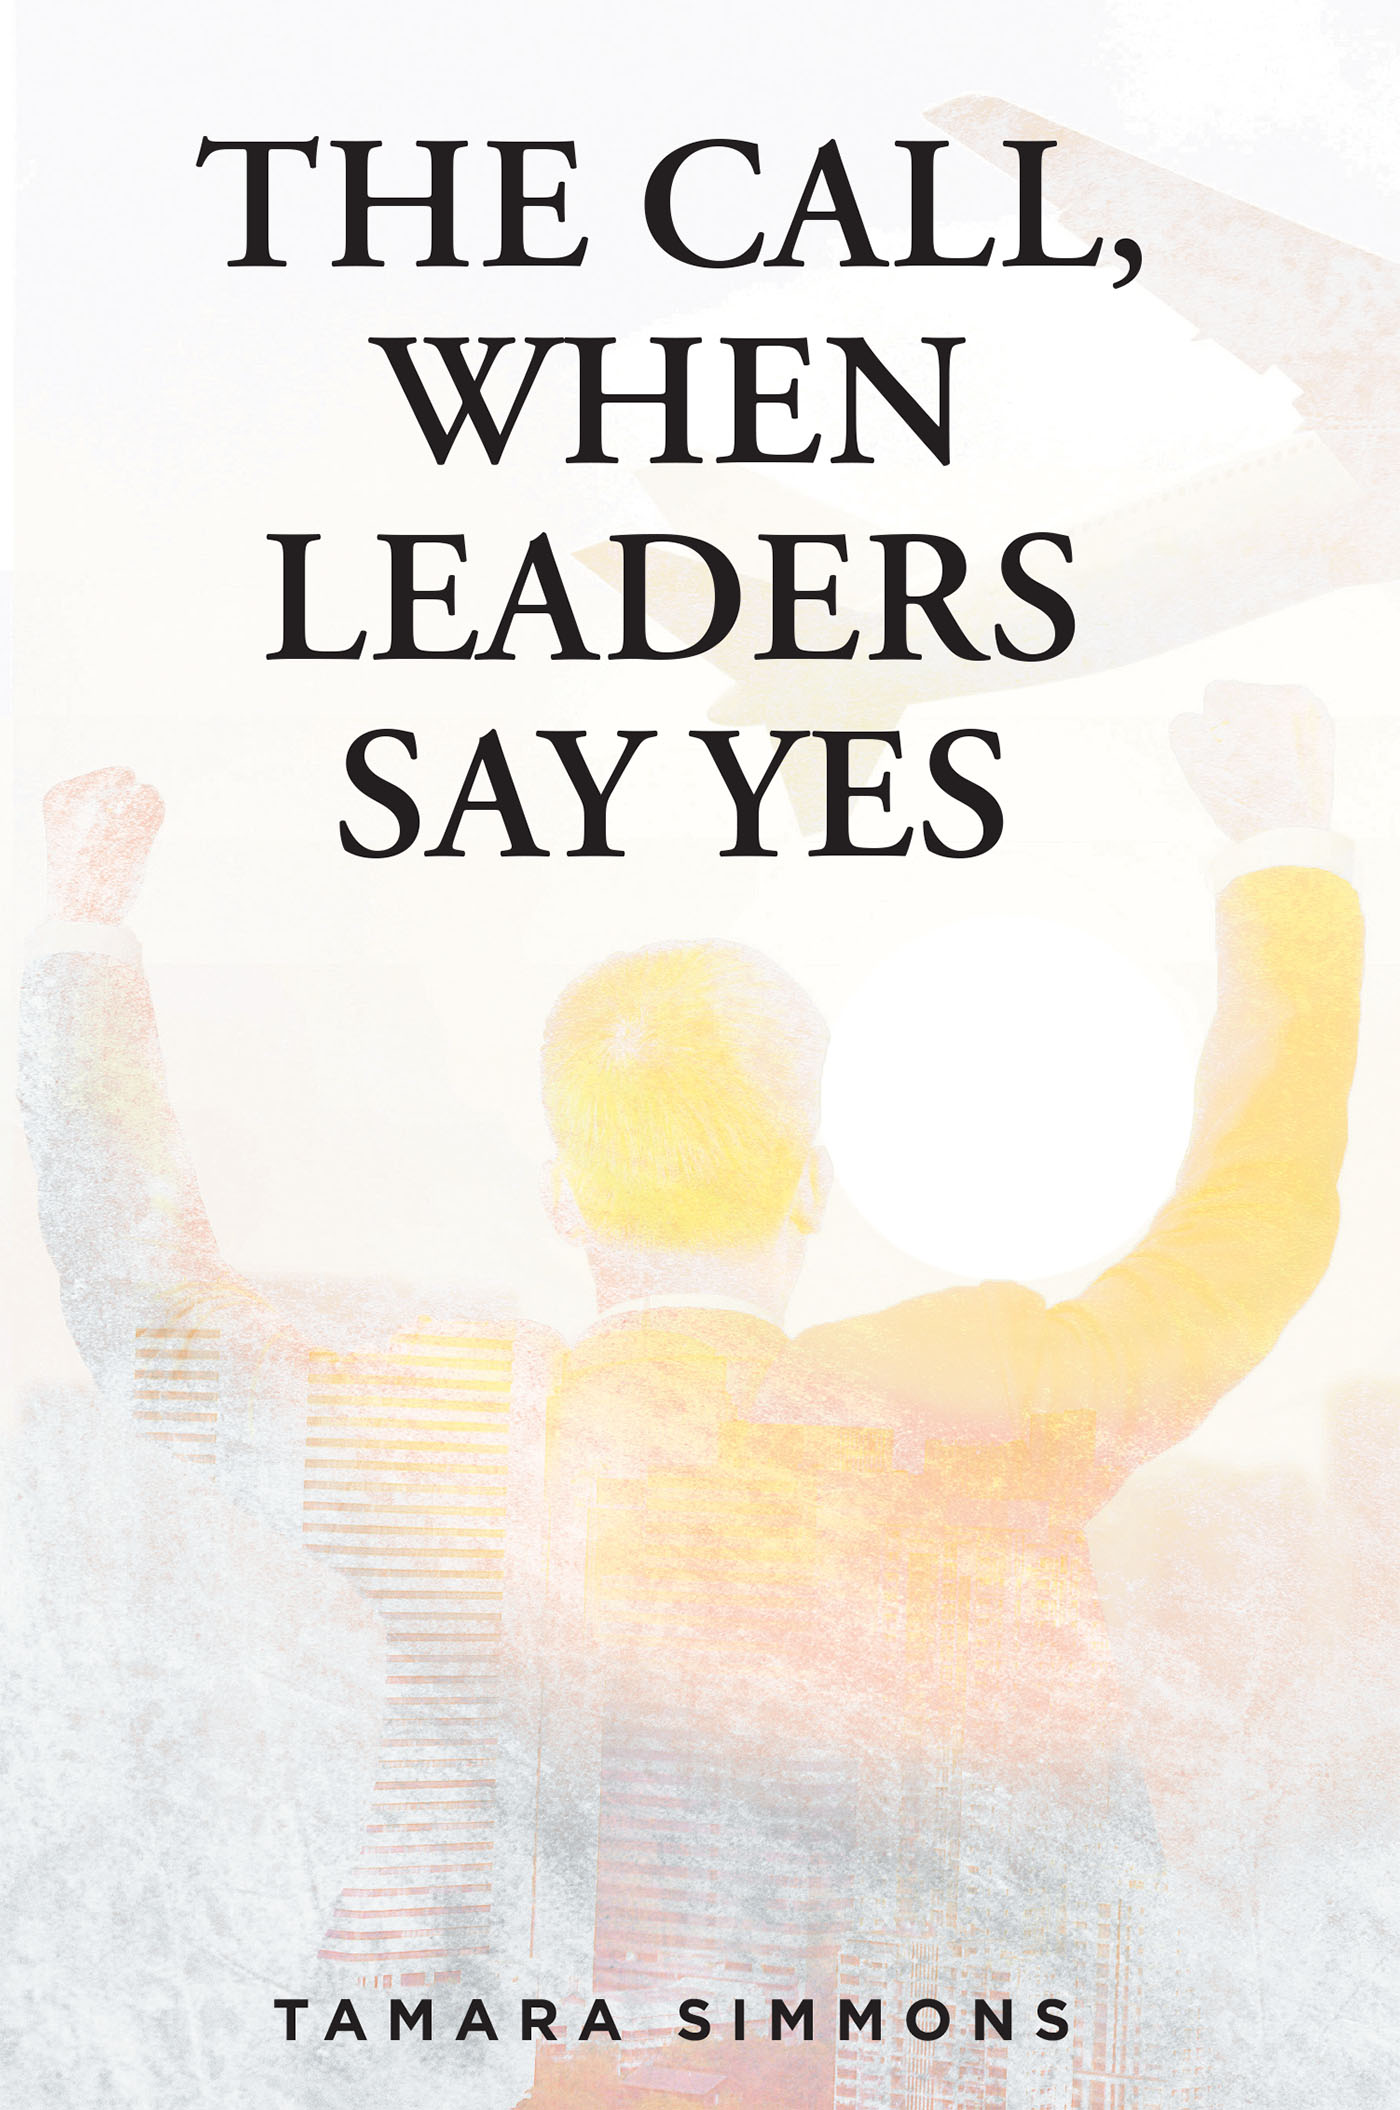 Tamara Simmons’s Newly Released “The Call, When Leaders Say Yes” is an Informative Study of the Realities of Pastoral Leadership